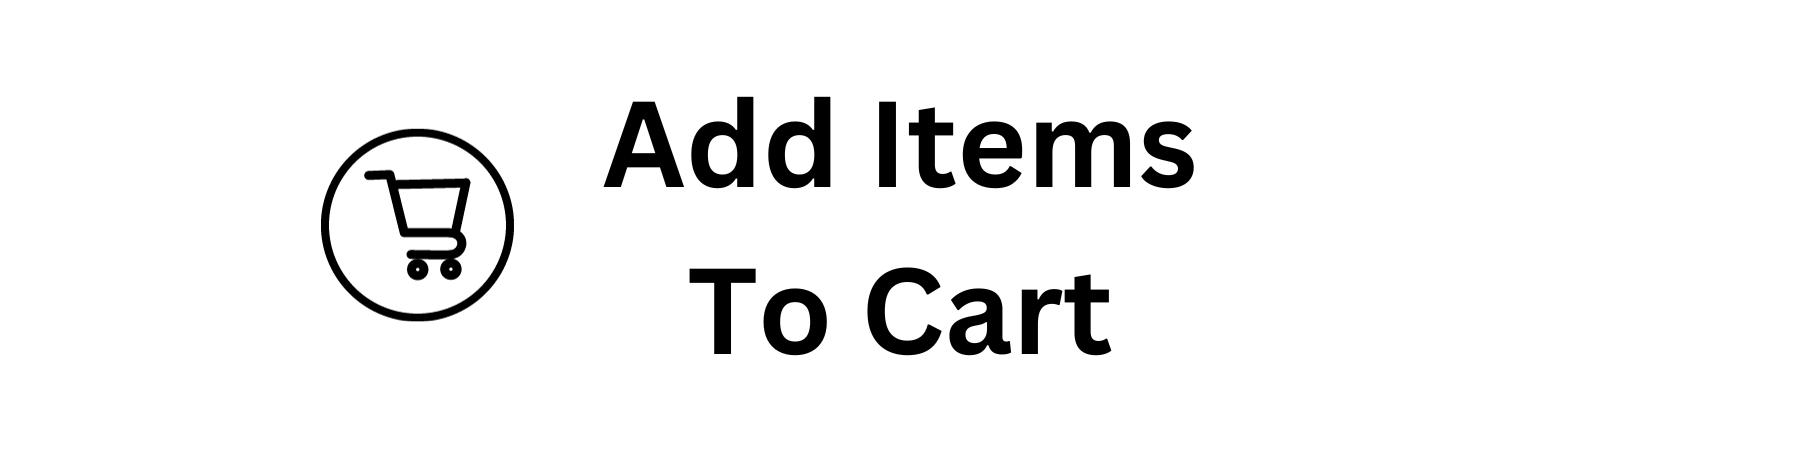 Add items to cart